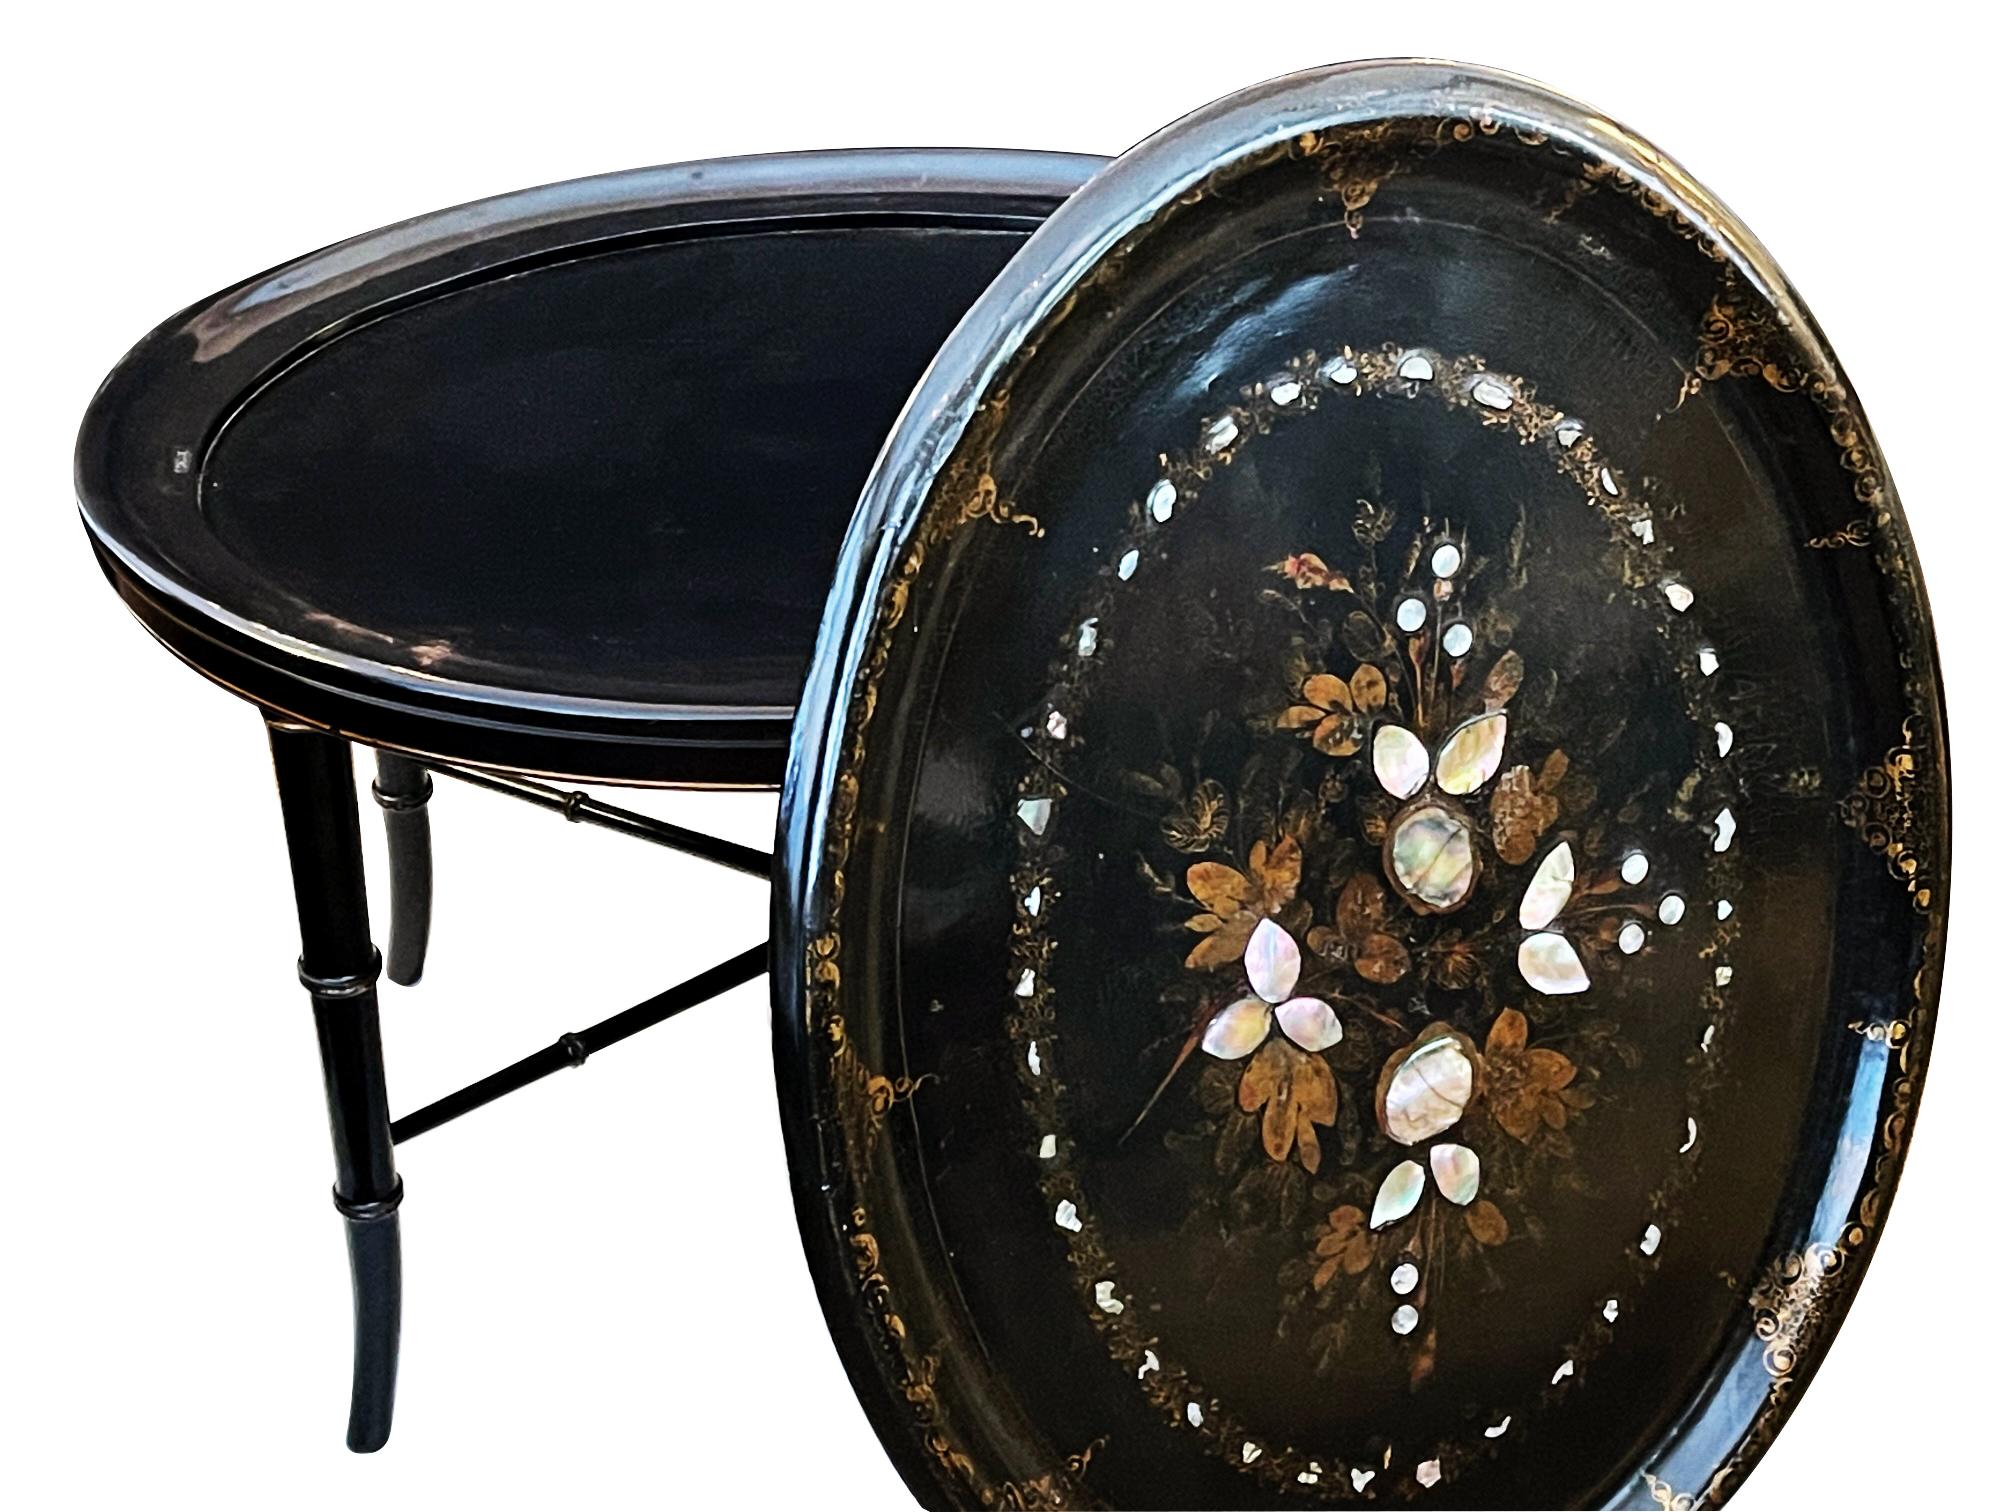 The oval tray with rolled lip centering a painted and inlaid floral bouquet within outer foliate perimeter bands; raised on a later ebonized faux bamboo stand.